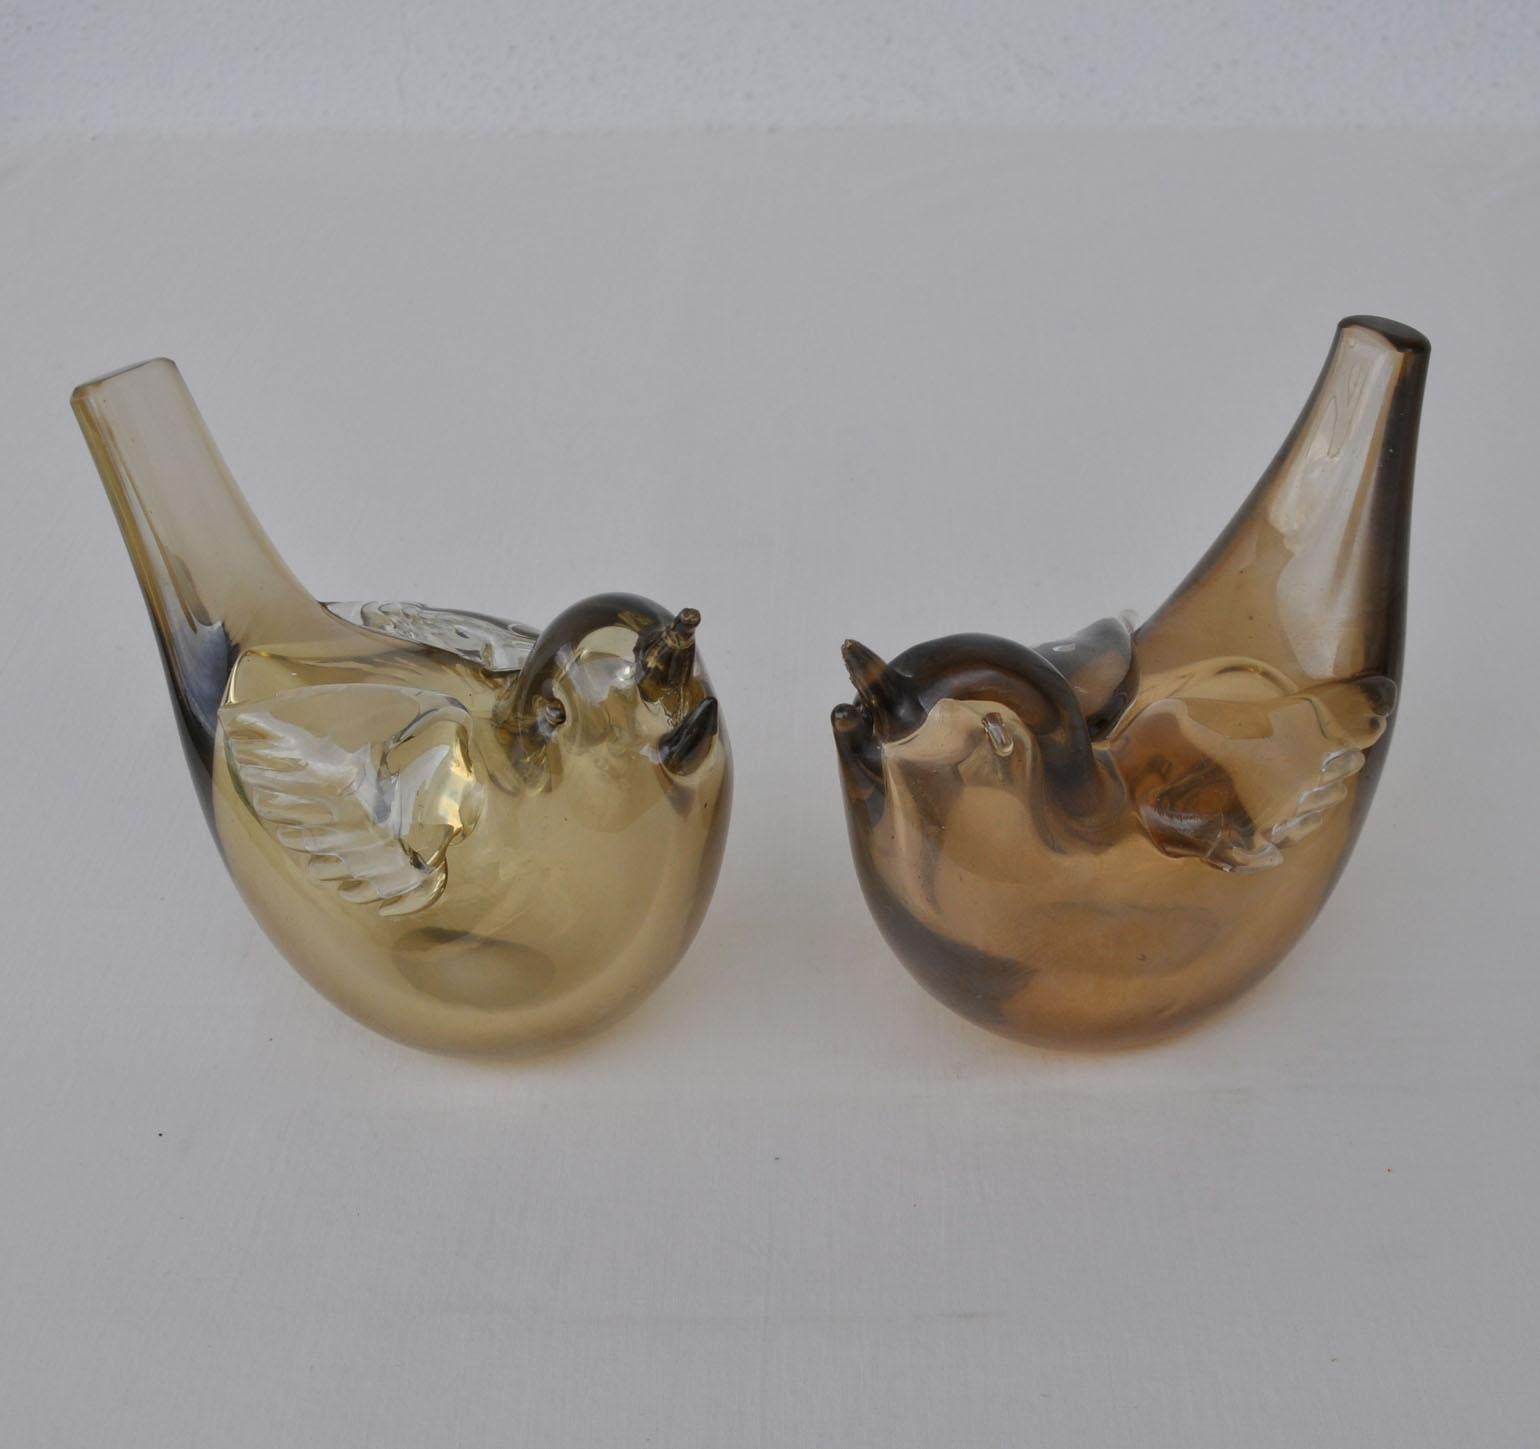 Hand-Crafted Pair of Chirping Birds, Hand Blown Iridescent Gold Crystal Glass by Paolo Venini